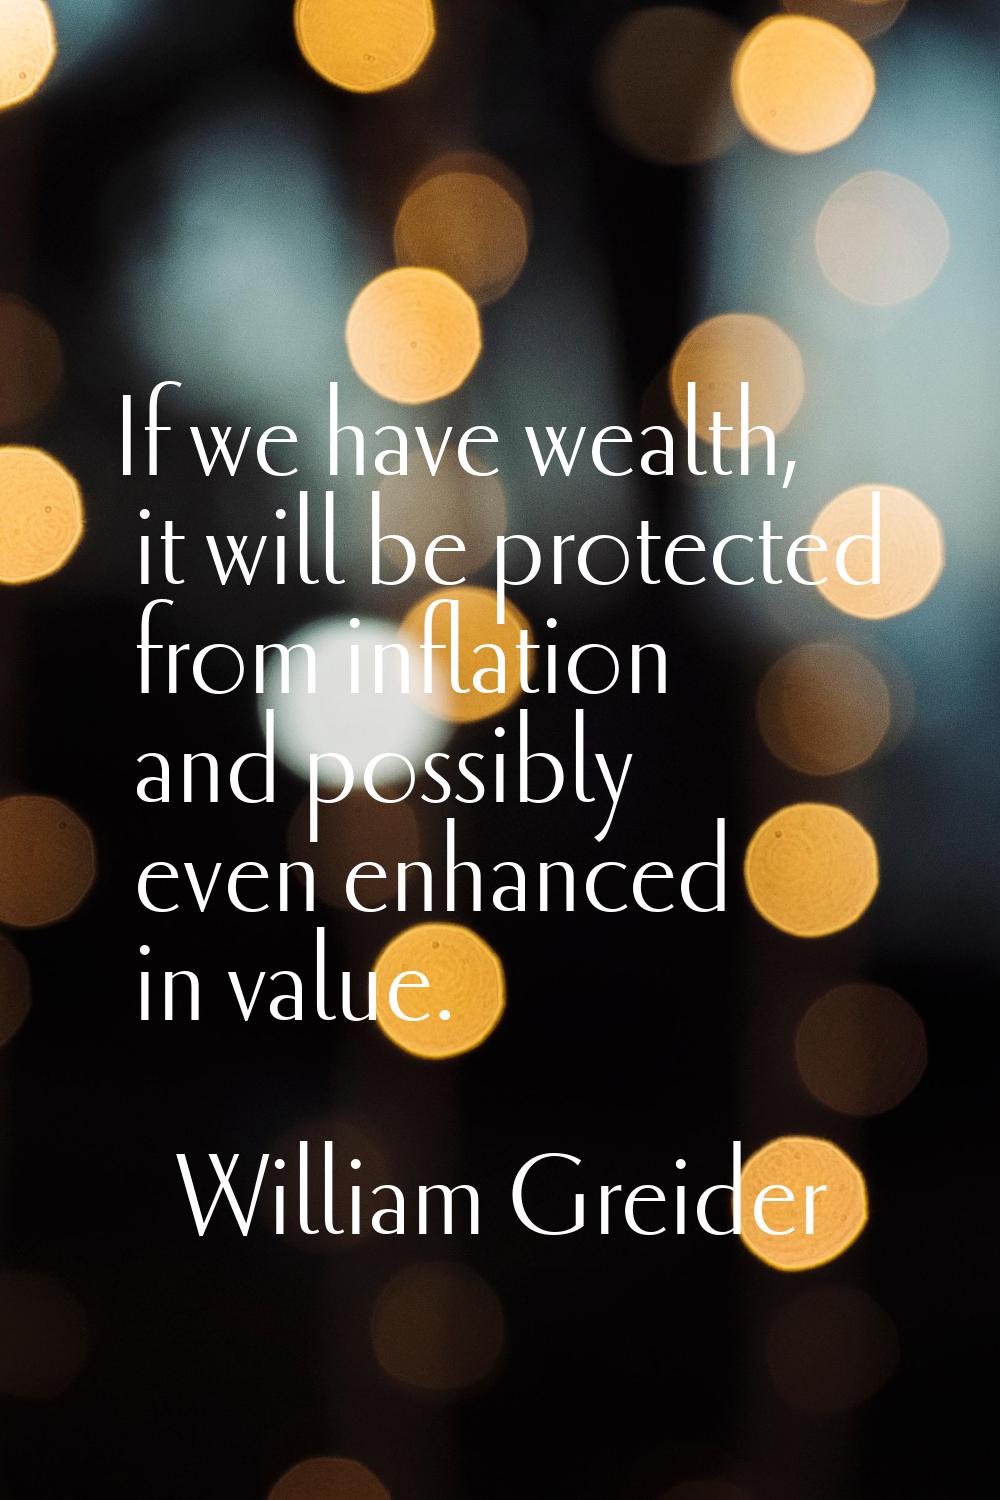 If we have wealth, it will be protected from inflation and possibly even enhanced in value.